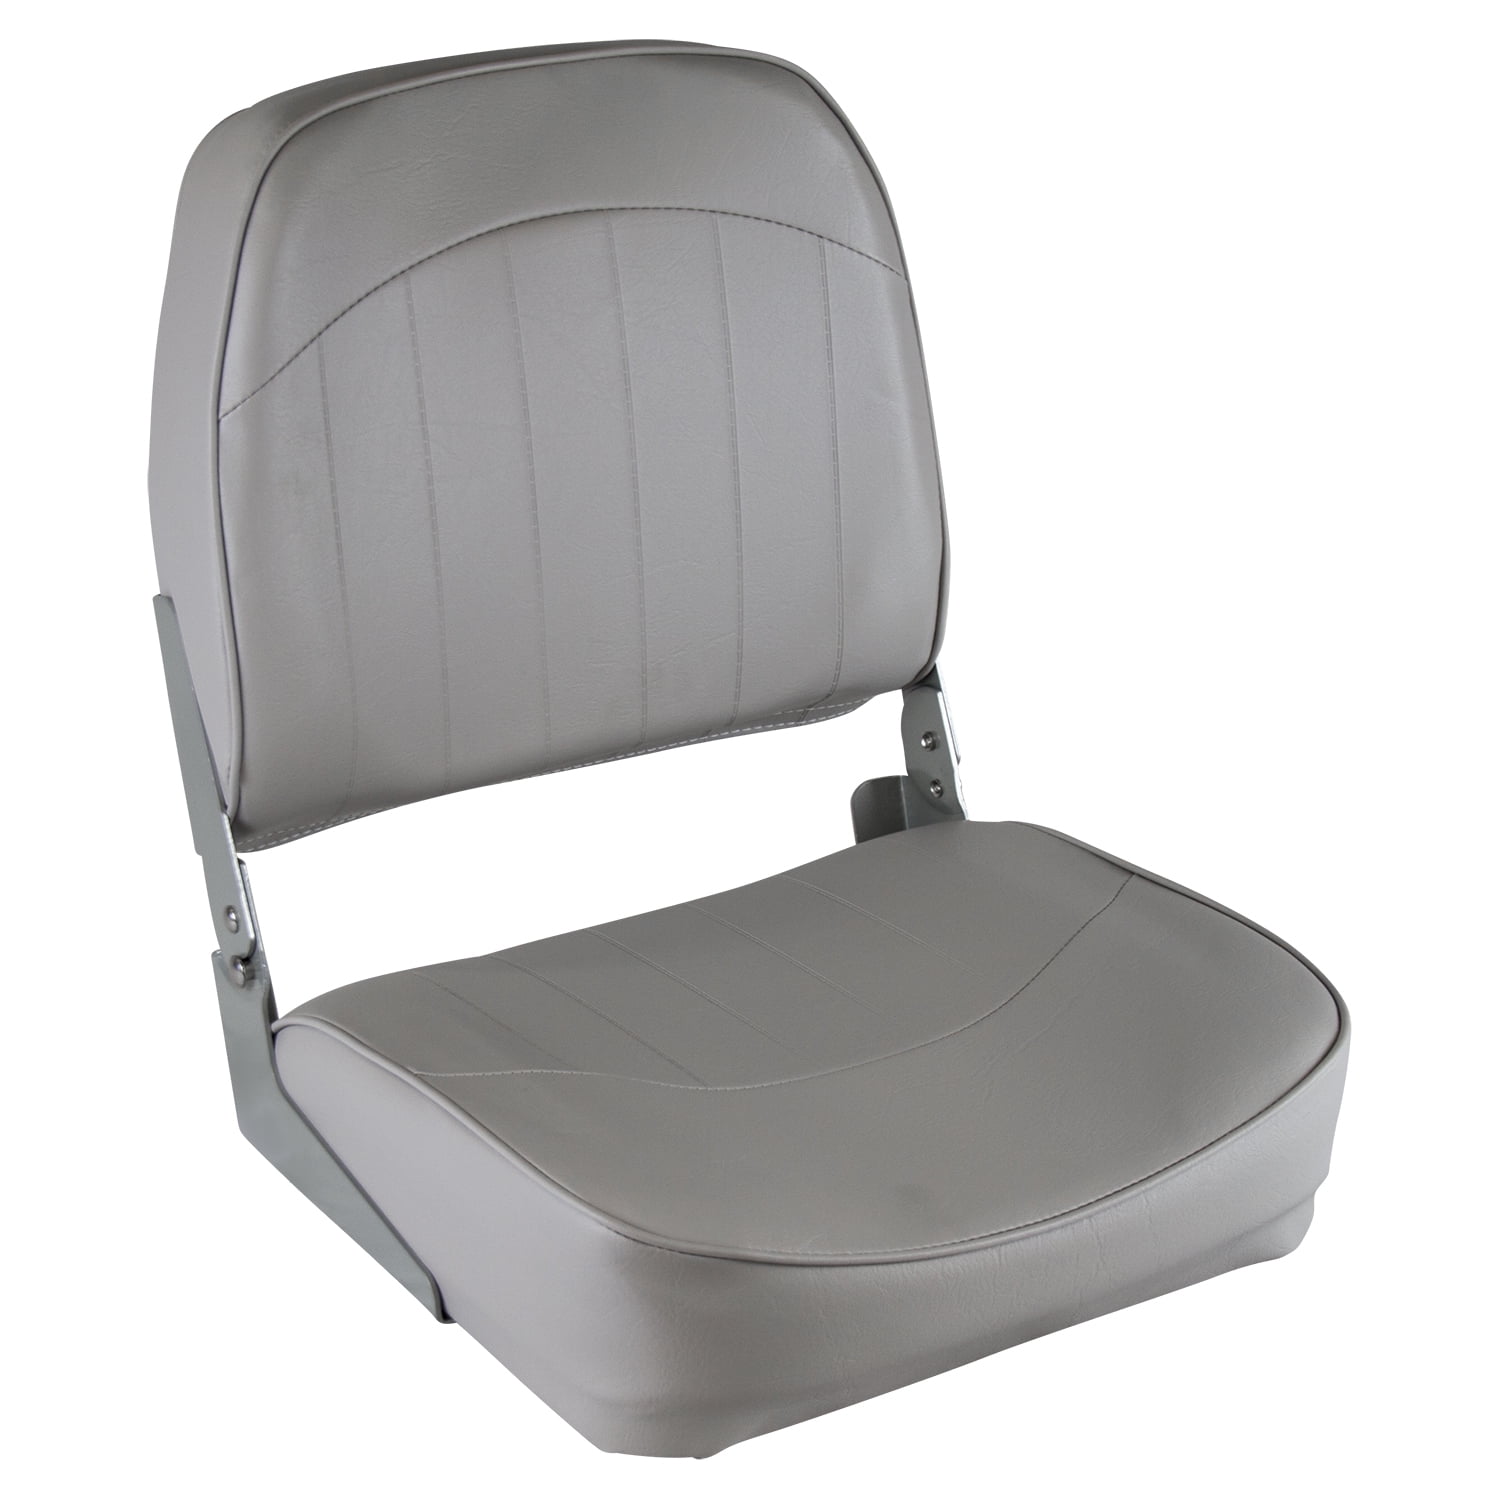 Wise 8wd734 Deluxe Embossed Vinyl Panel Padded Standard-low Boat Back Seat Gray for sale online 